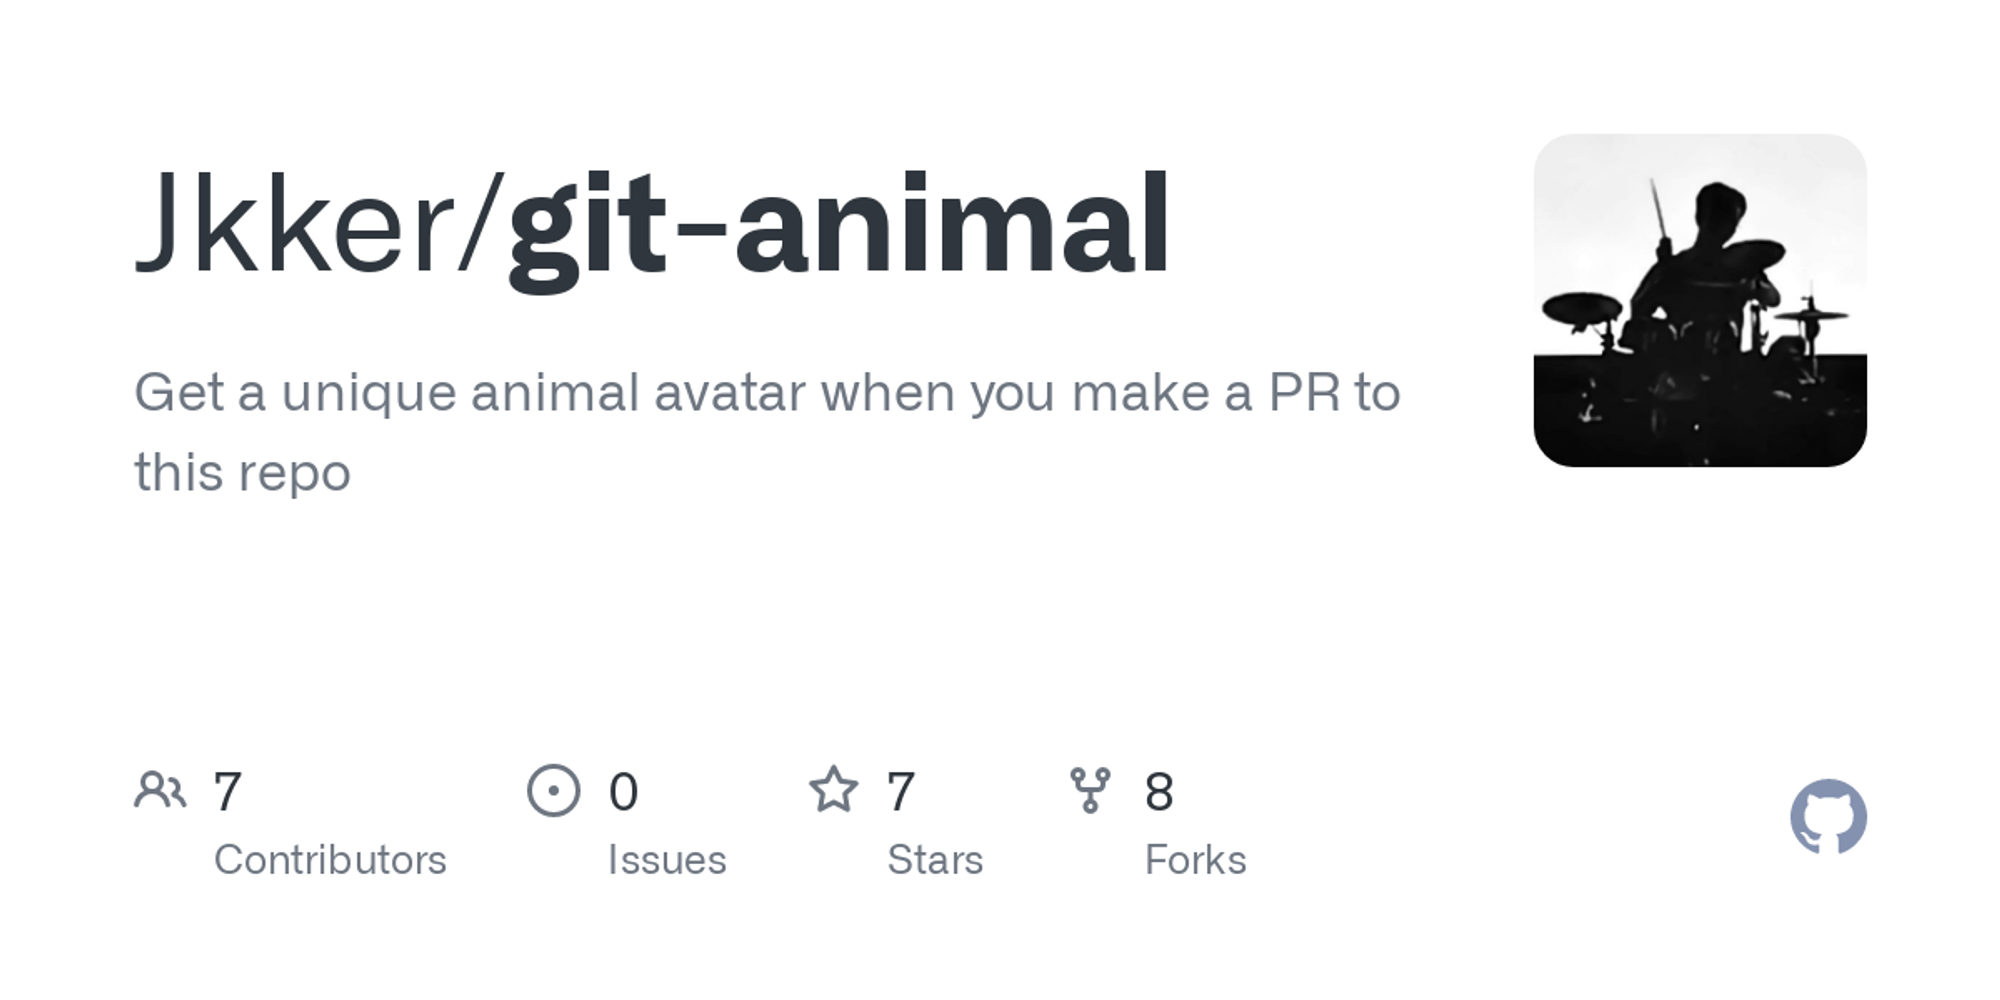 GitHub - Jkker/git-animal: Get a unique animal avatar when you make a PR to this repo